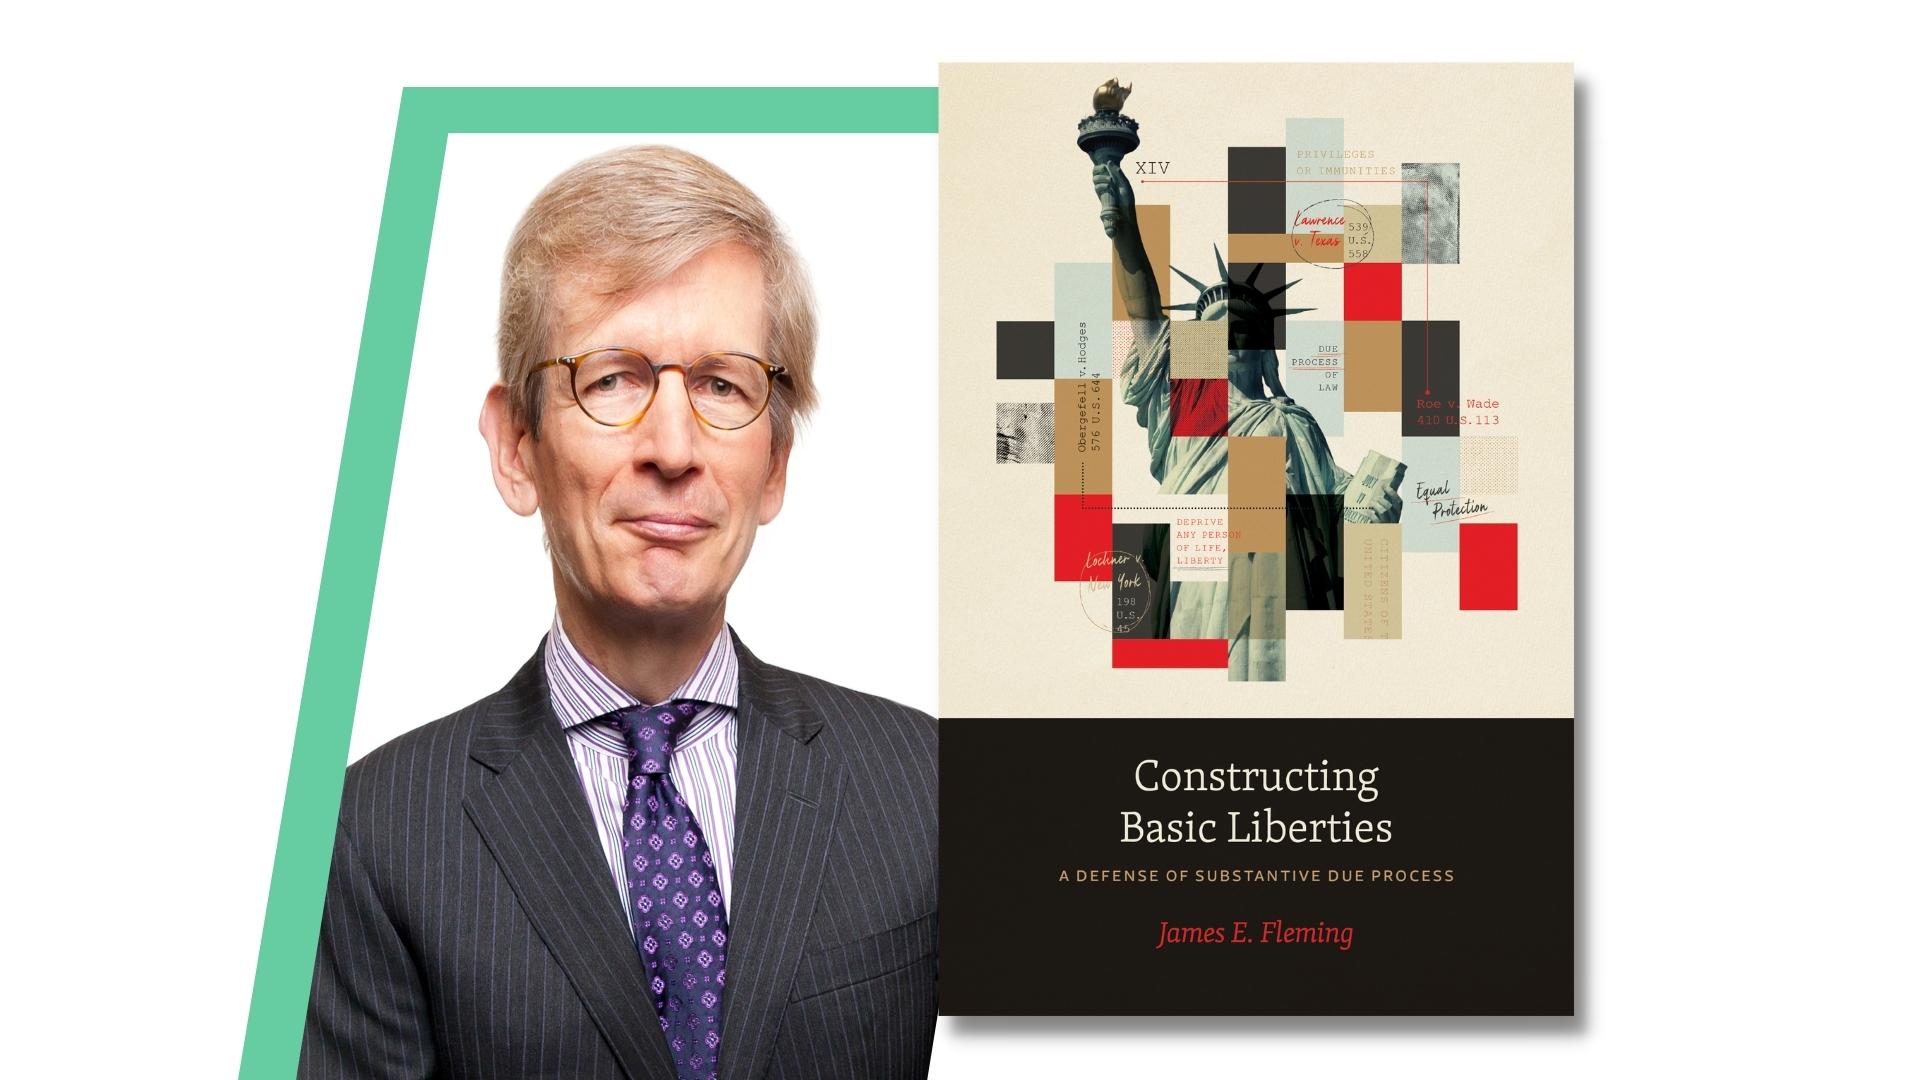 Professor James Fleming and the cover of his book, "Constructing Basic LIberties"